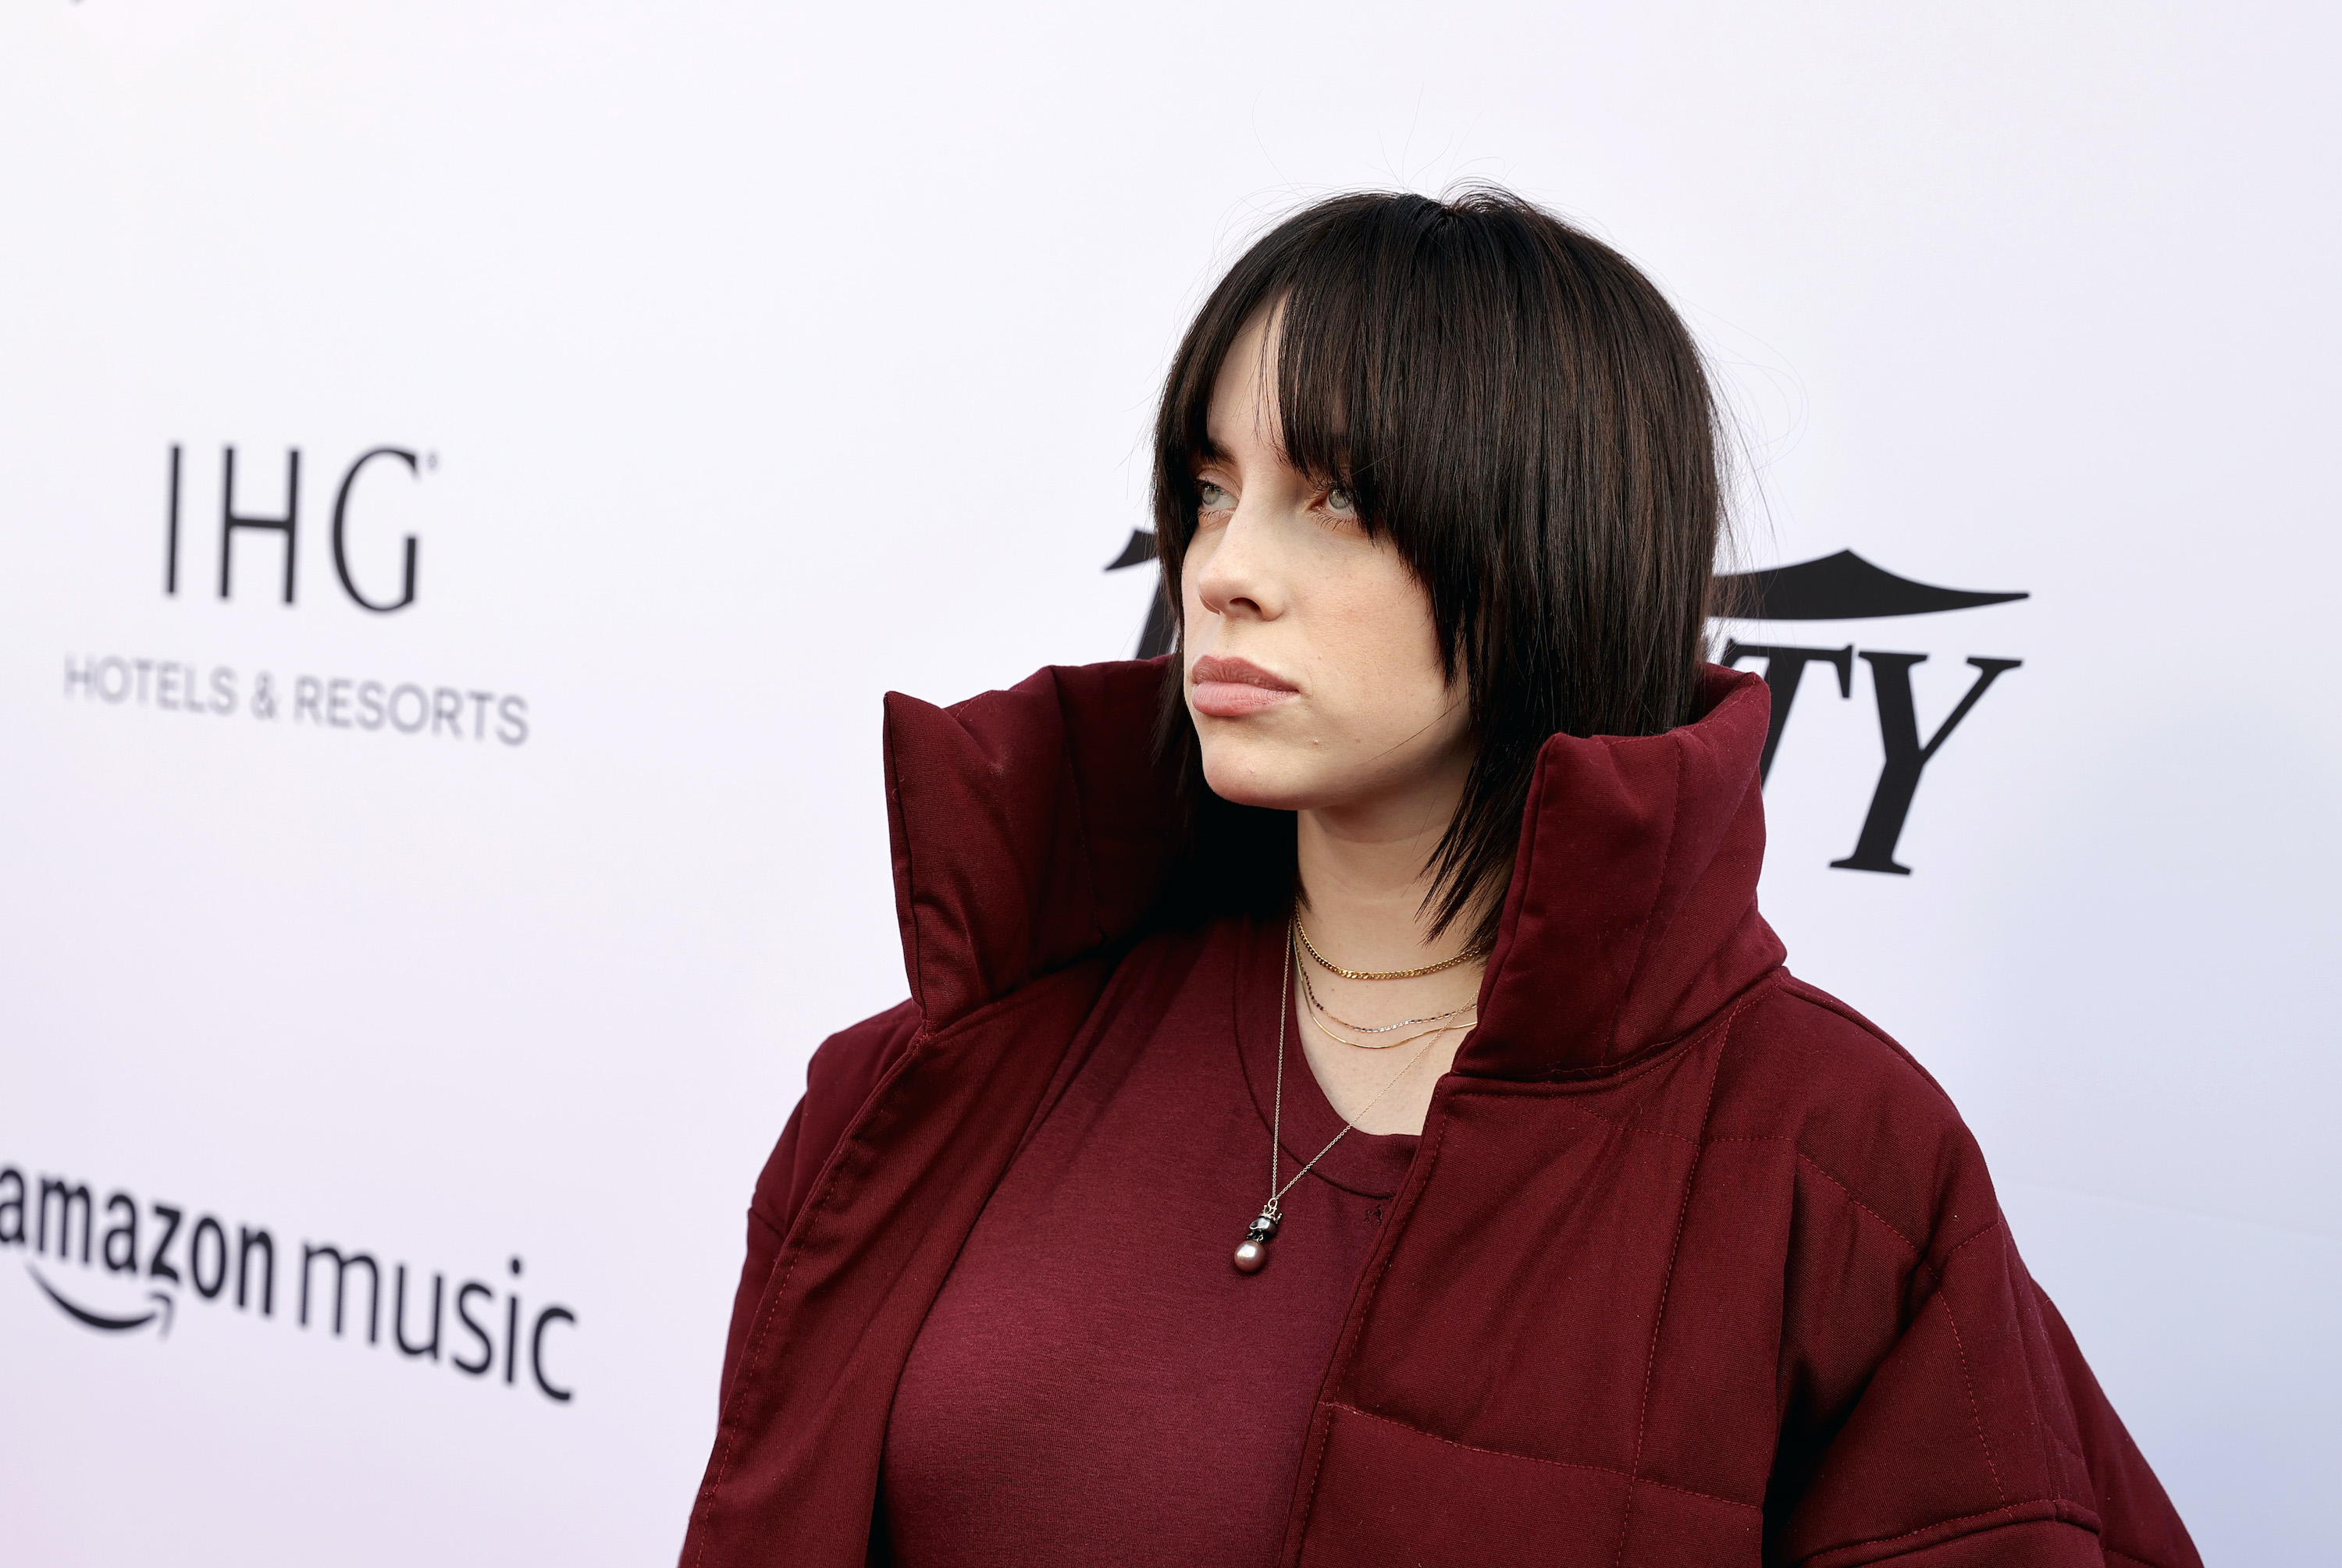 Antisex With Younger Boy - Billie Eilish is Right About Pornography's Harms | Opinion